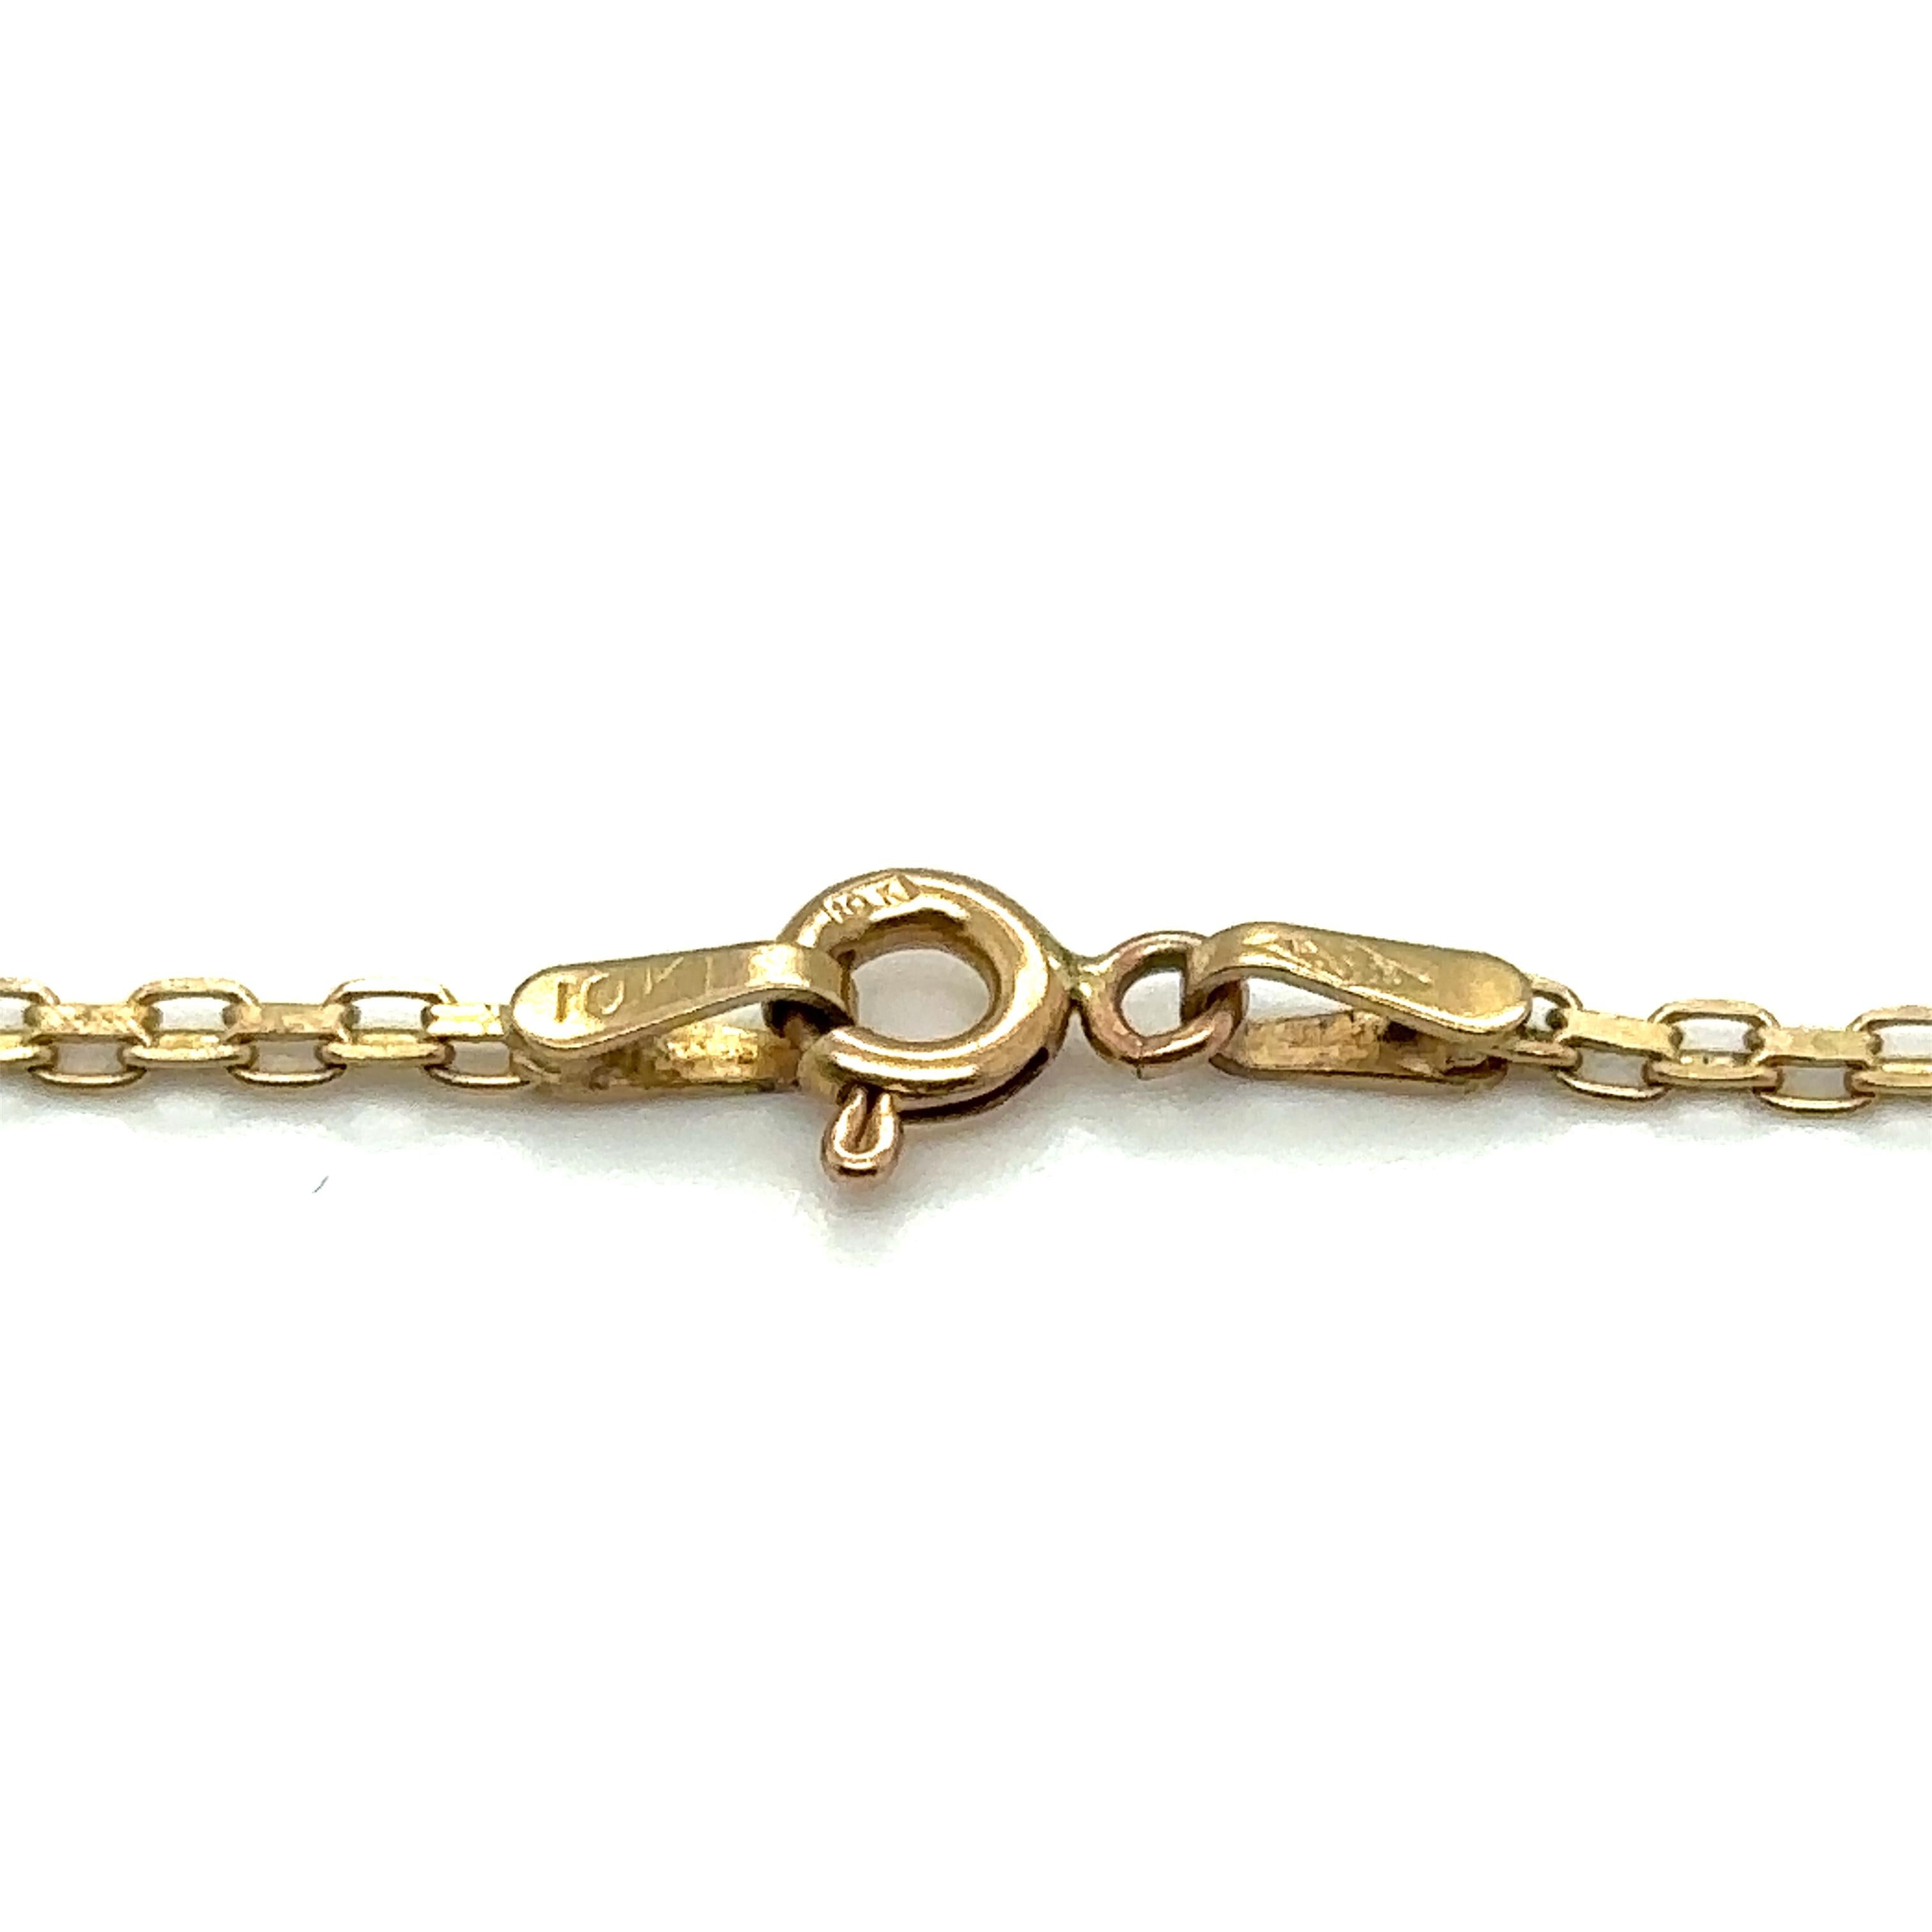 Circa 1990s Chinese Character Charm Bracelet in 10 Karat Gold For Sale 3